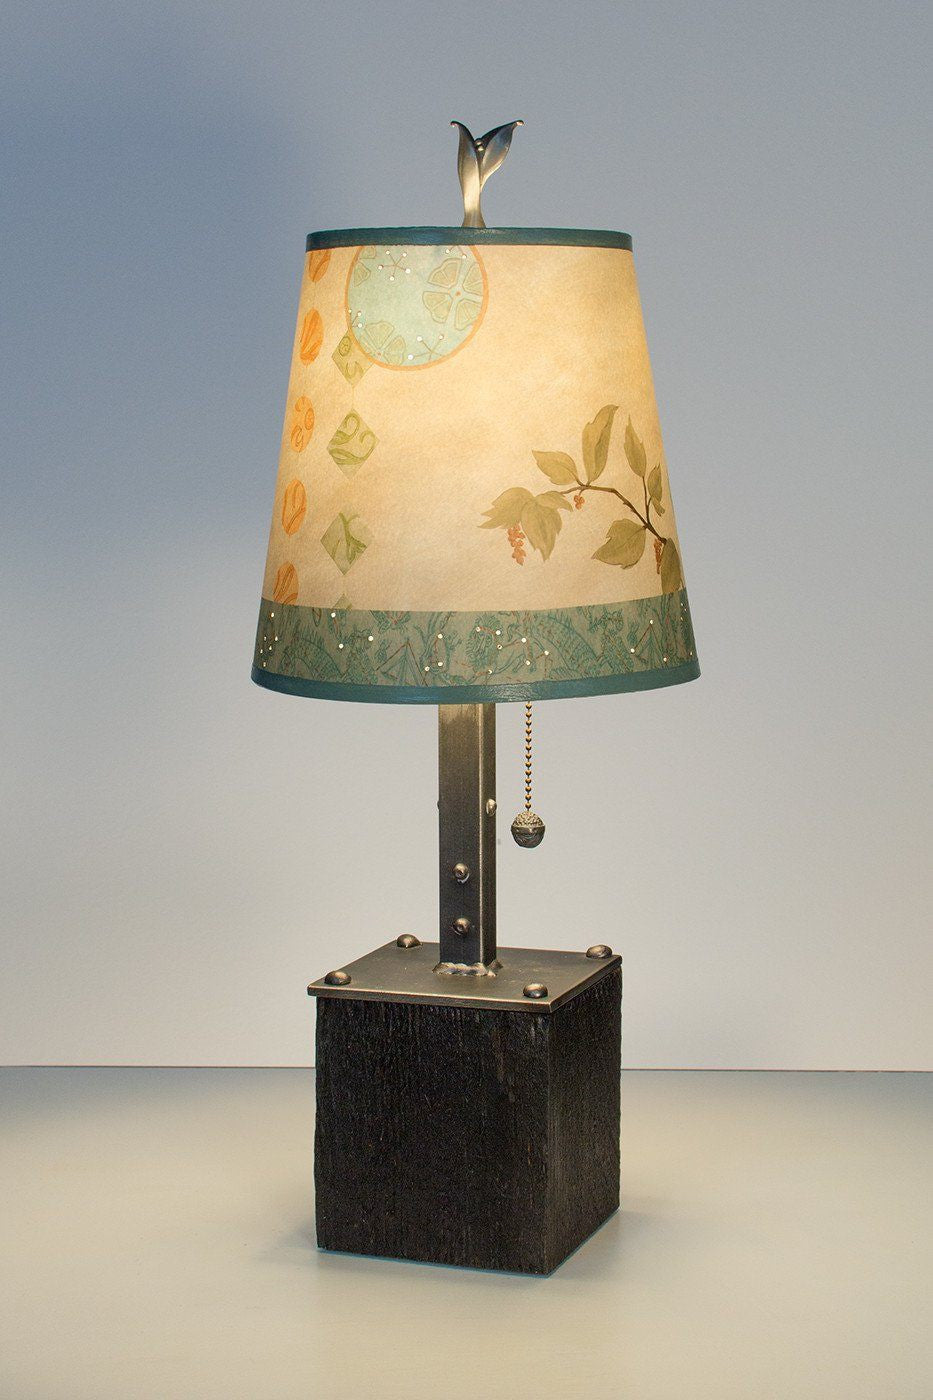 Janna Ugone &amp; Co Table Lamps Steel Table Lamp on Reclaimed Wood with Small Drum Shade in Celestial Leaf